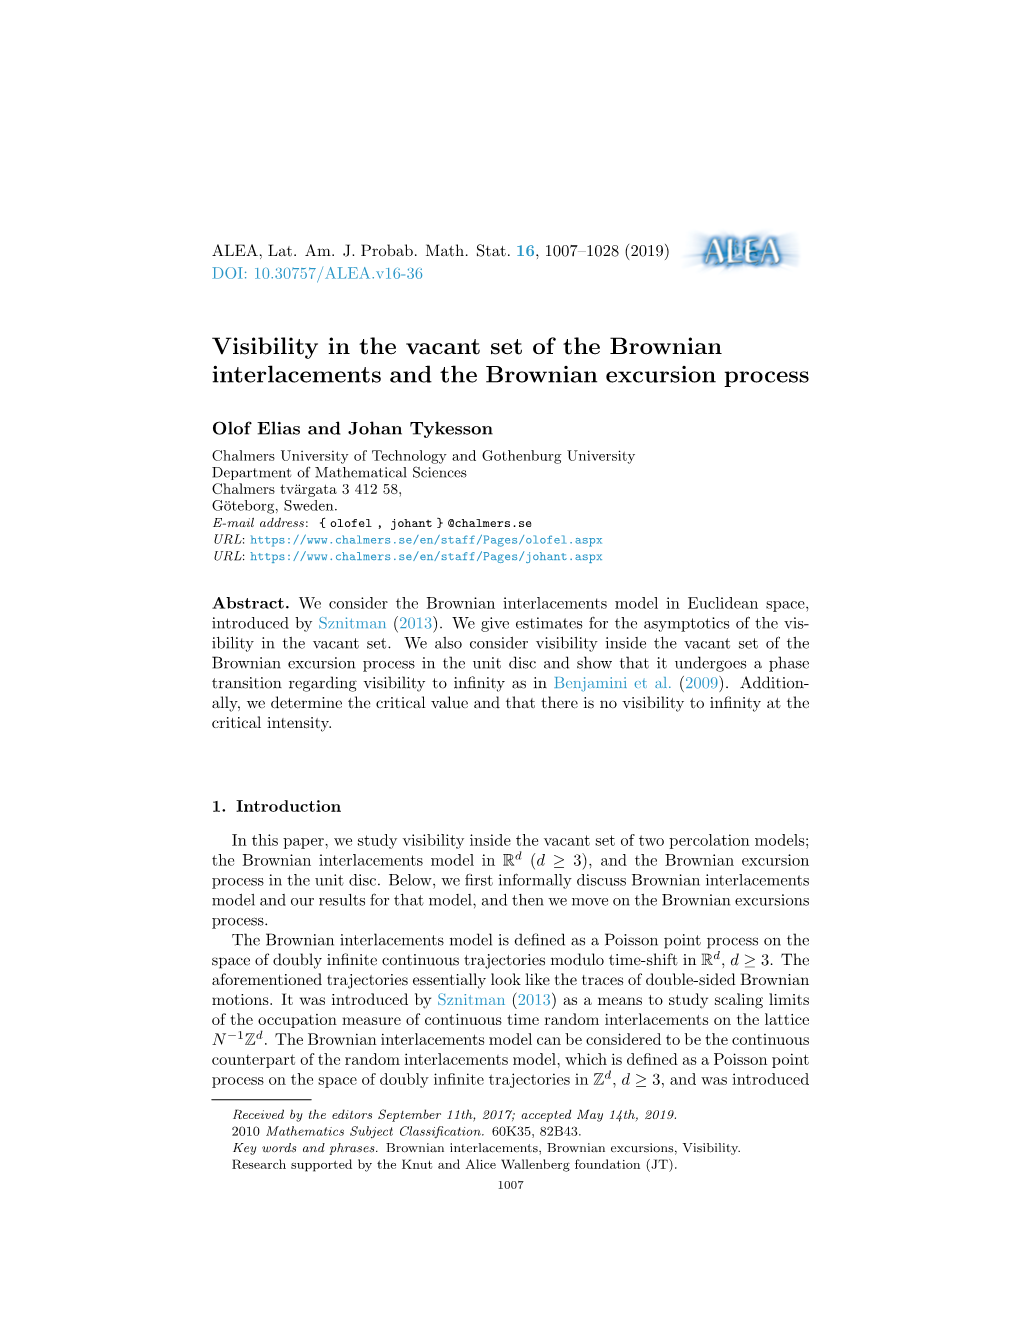 Visibility in the Vacant Set of the Brownian Interlacements and the Brownian Excursion Process